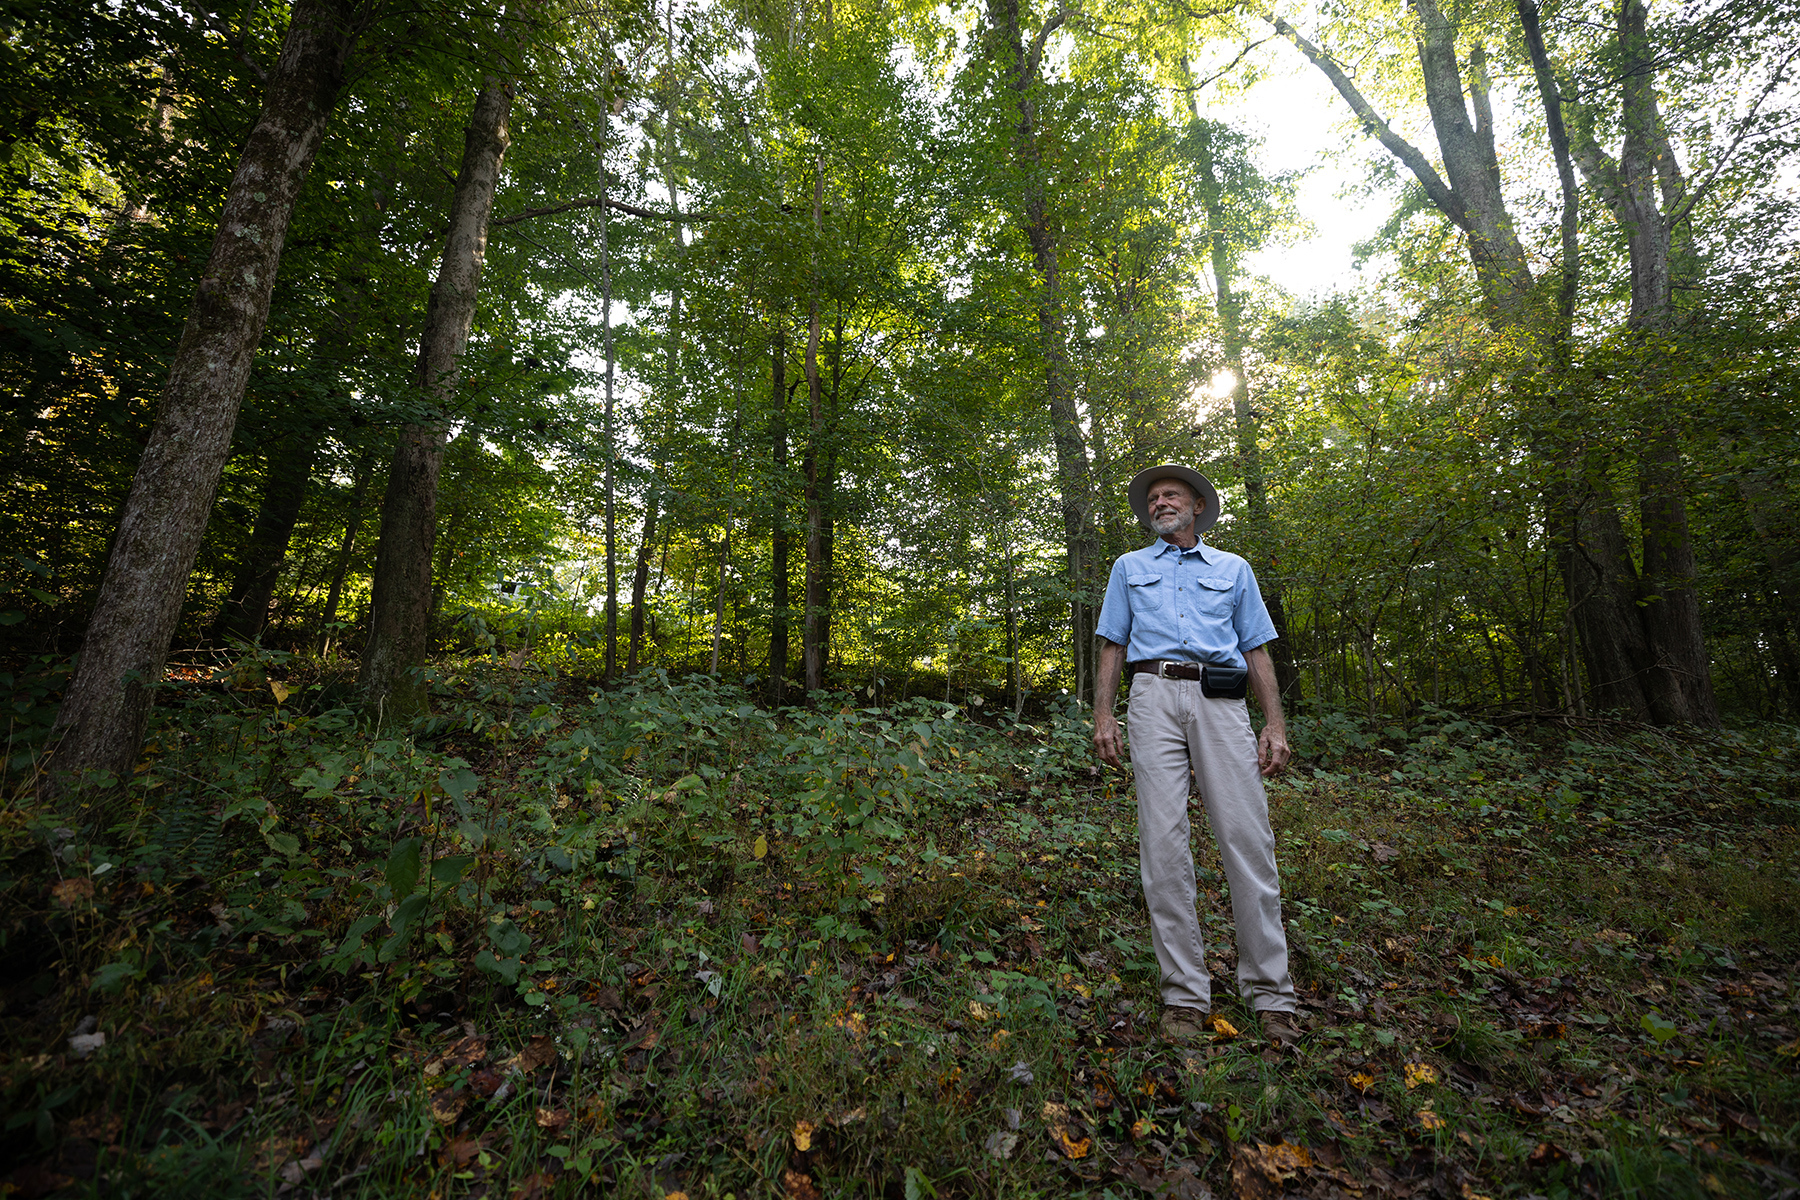 Jerry Long, in khakis and blue shirt, stands in forest.